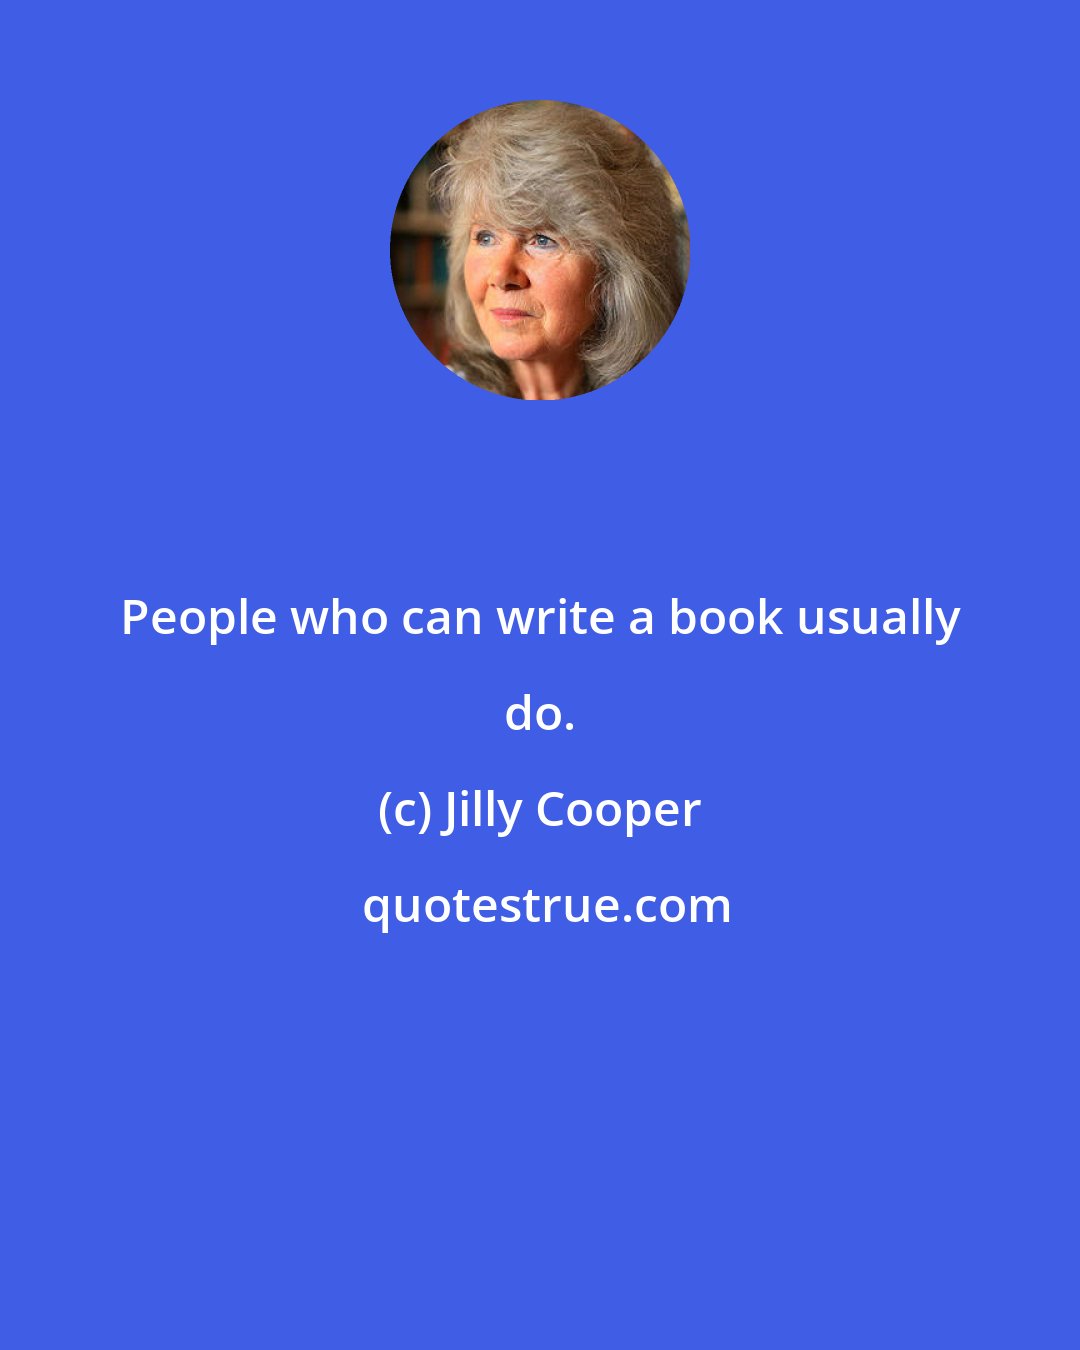 Jilly Cooper: People who can write a book usually do.